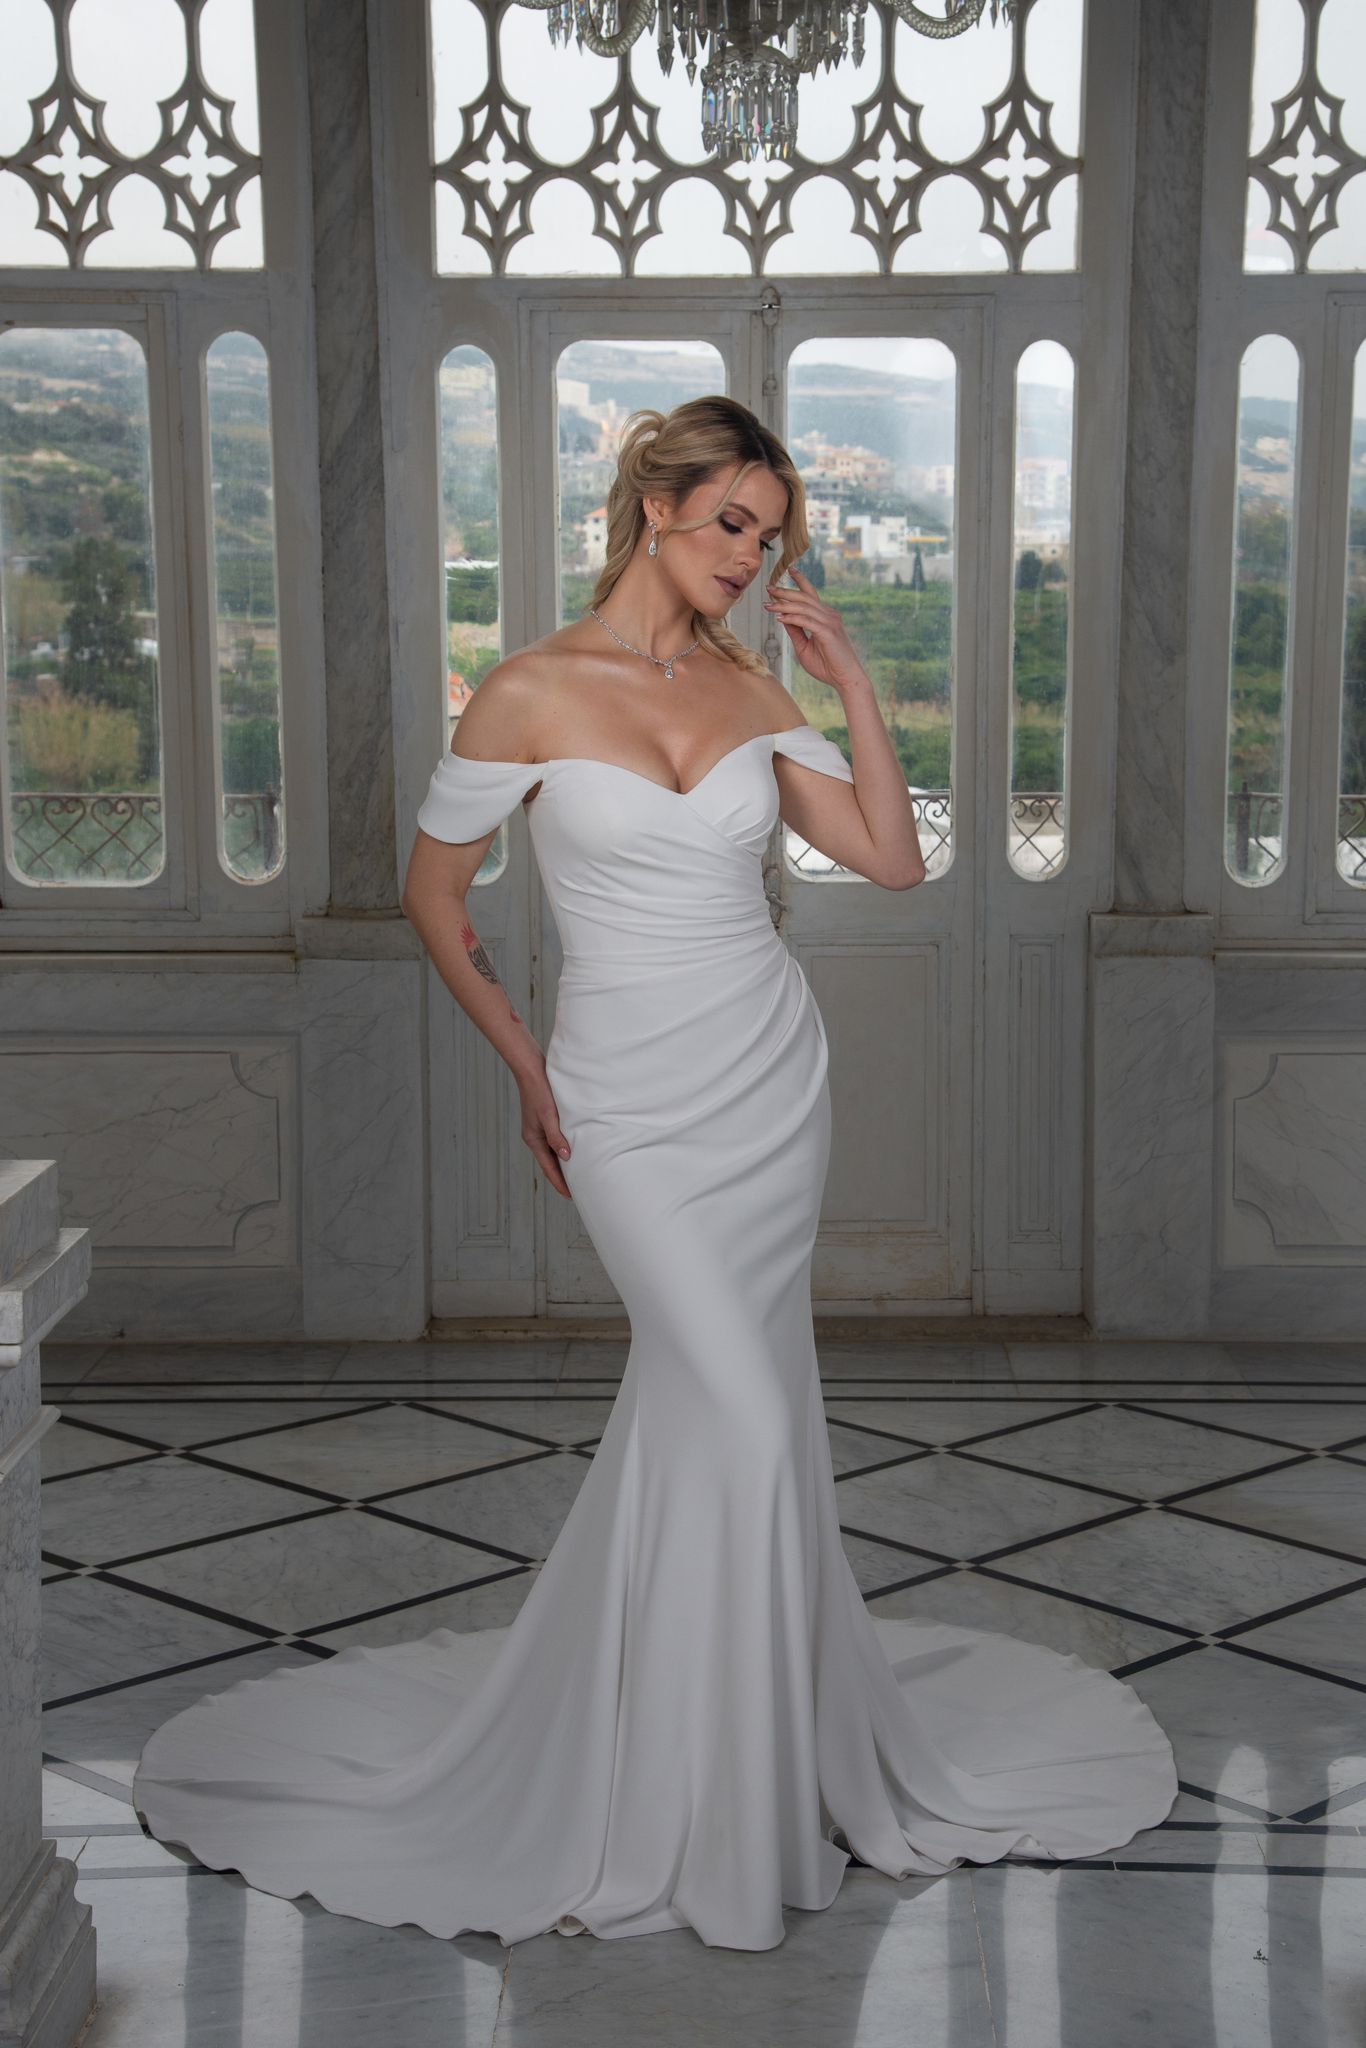 simple minimalistic wedding dress with ruching and off the shoulder straps.